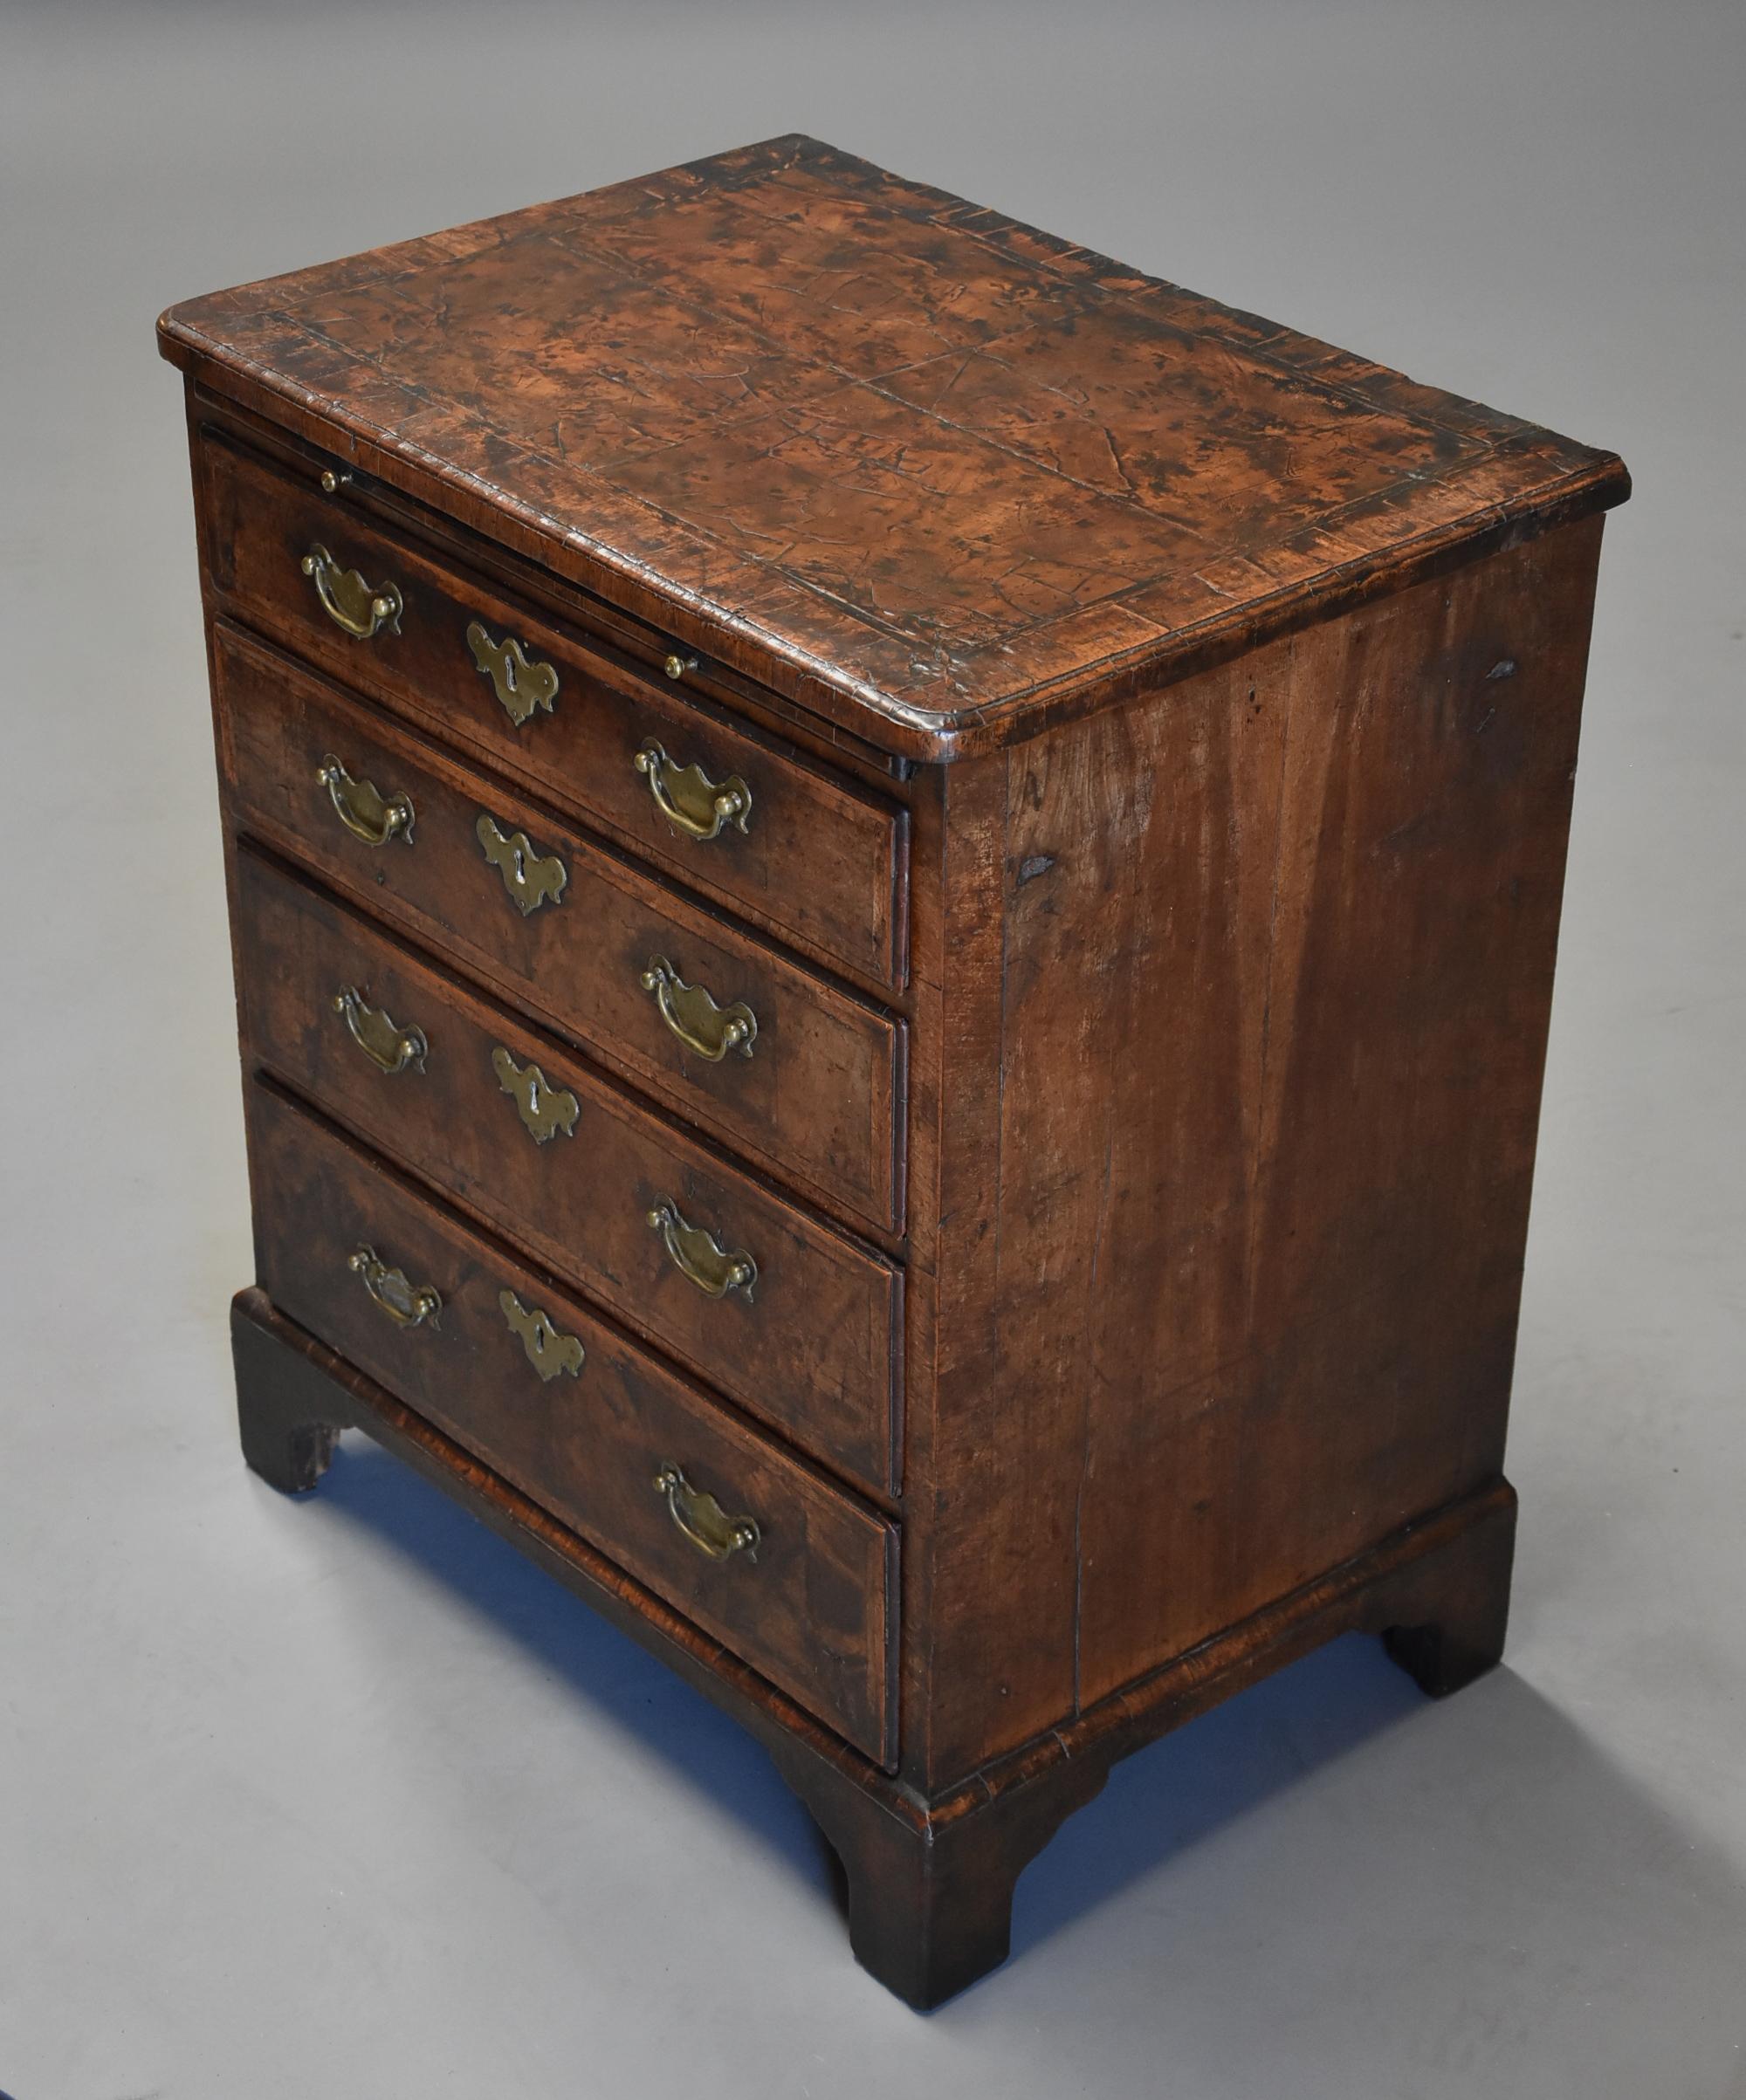 An extremely rare example of an early 18th century (circa 1720) walnut chest of drawers in untouched condition, of superb original patina and of small proportions.

It is very rare these days to come across such an untouched piece of 18th century